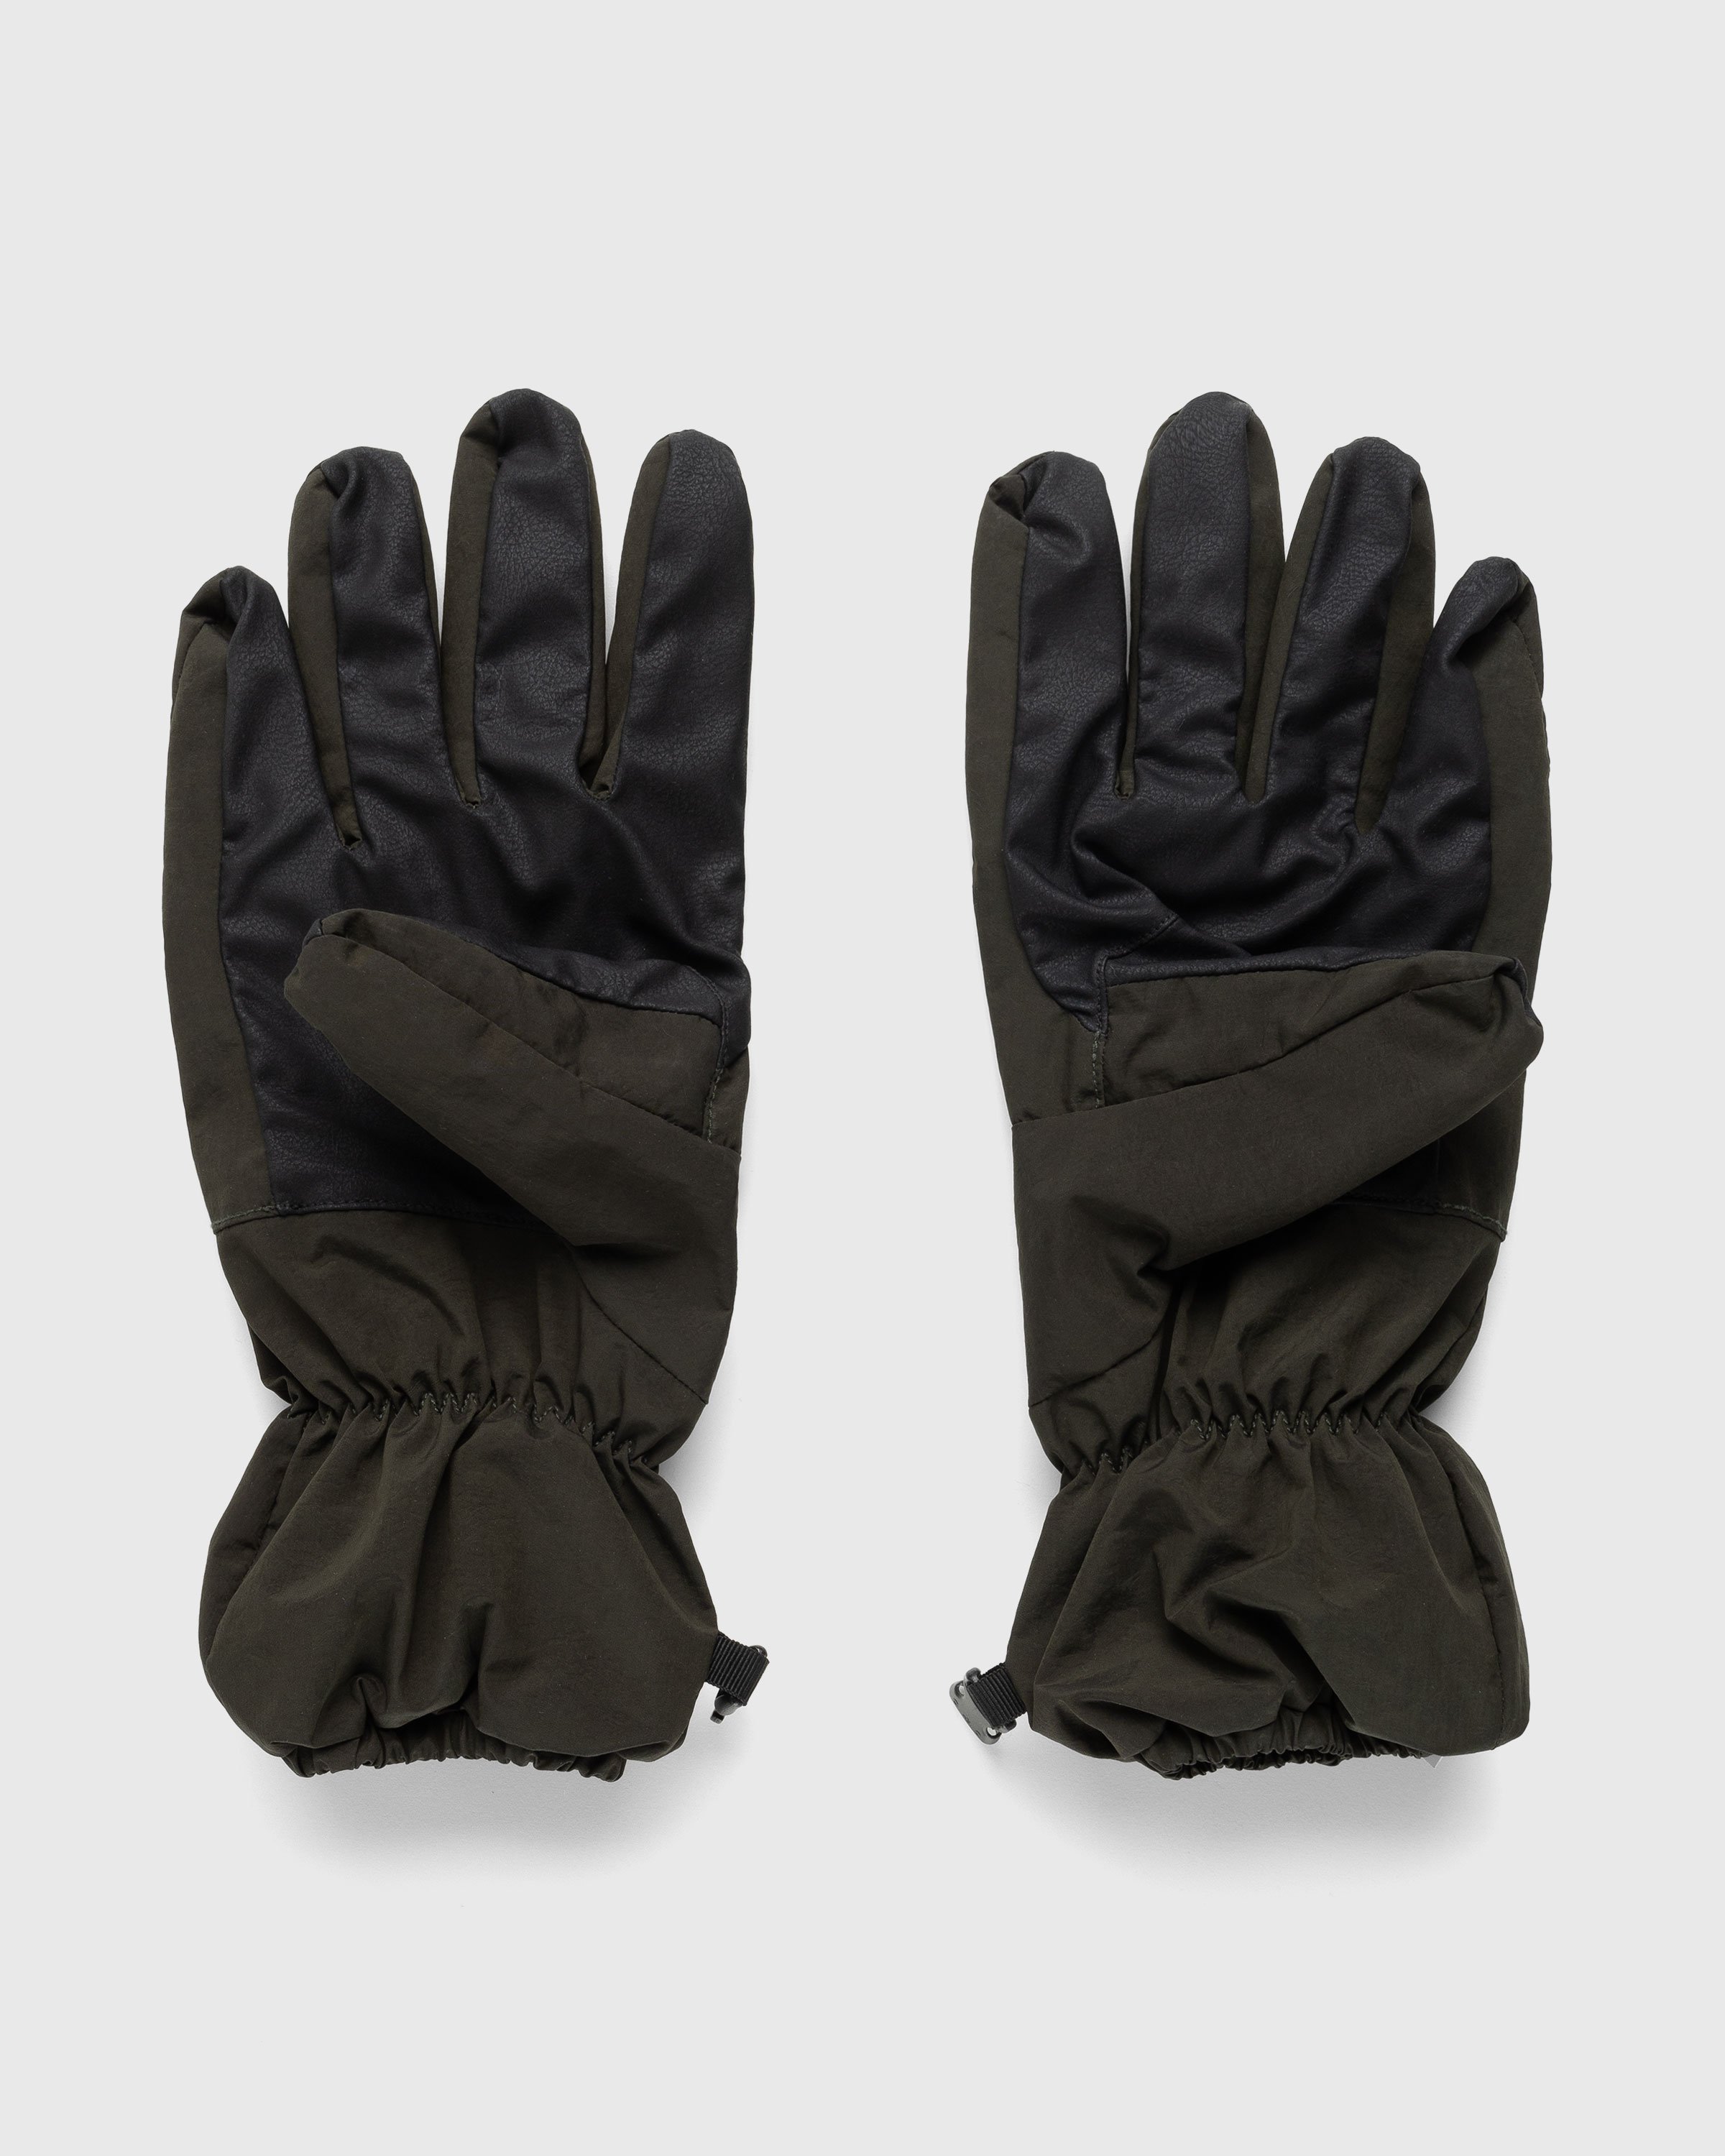 Stone Island - GLOVES Green 791592069 - Accessories - Green - Image 2